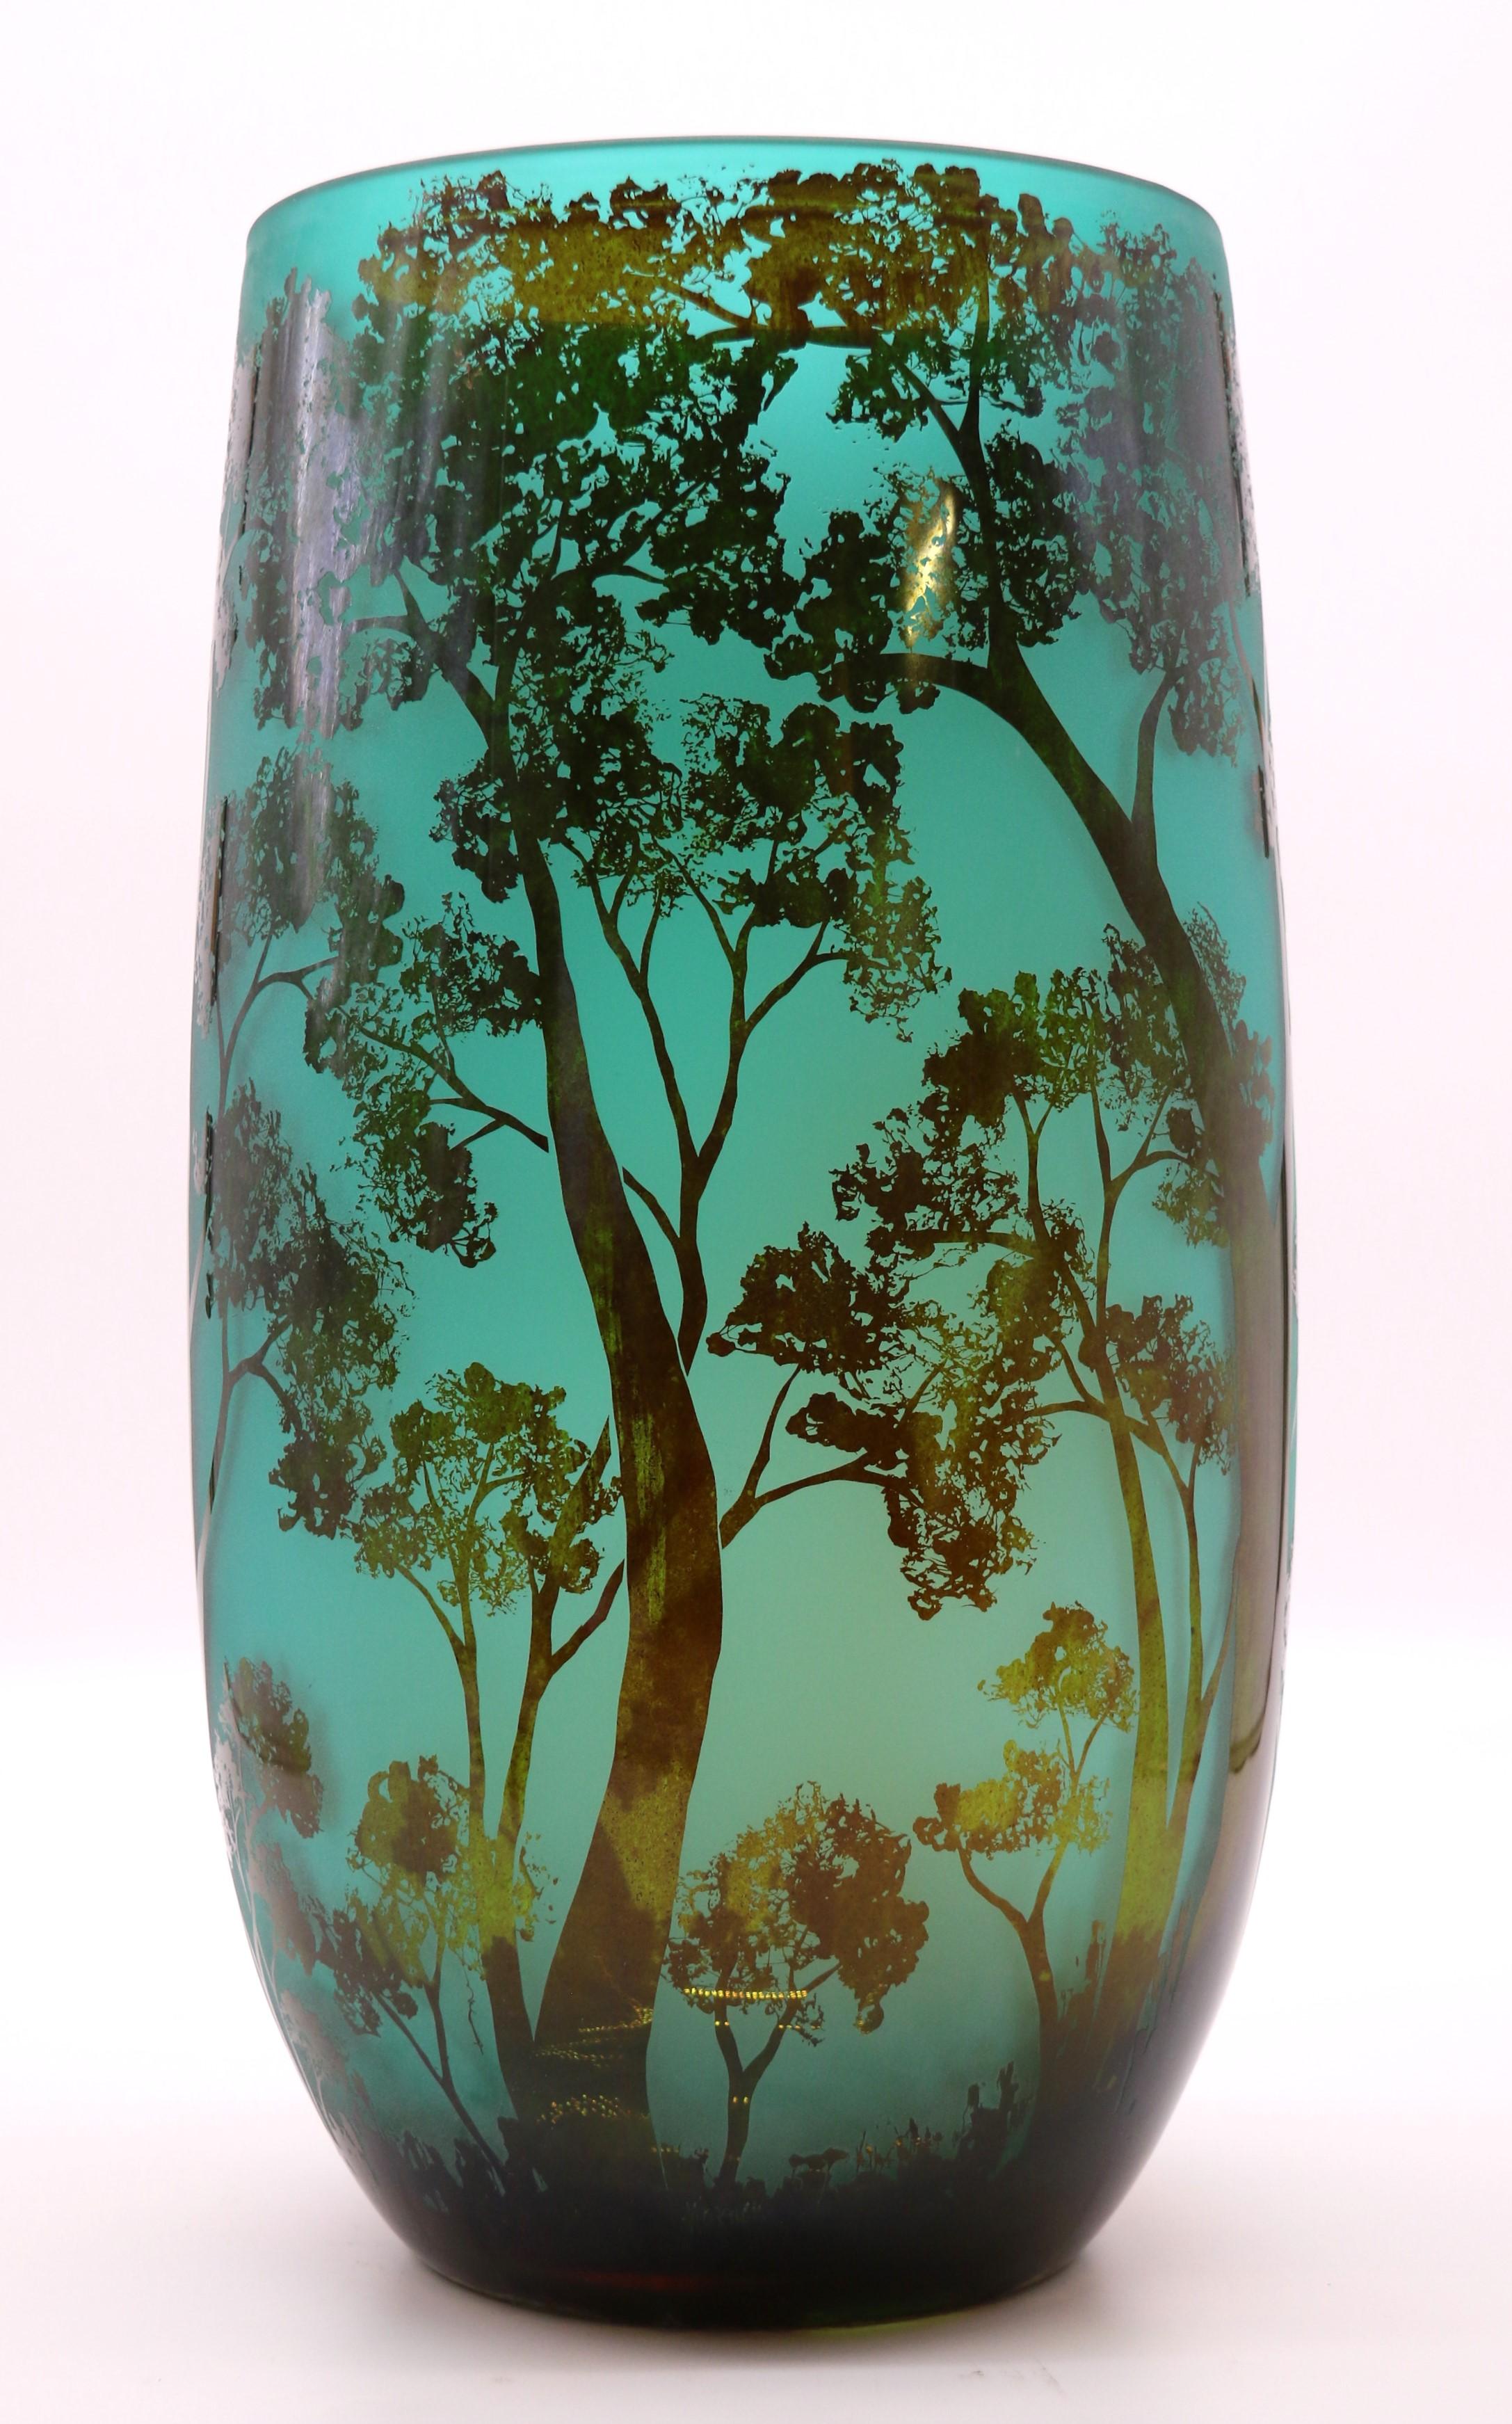 A large 20th century cameo glass vase decorated with an intricate woodland scene 9